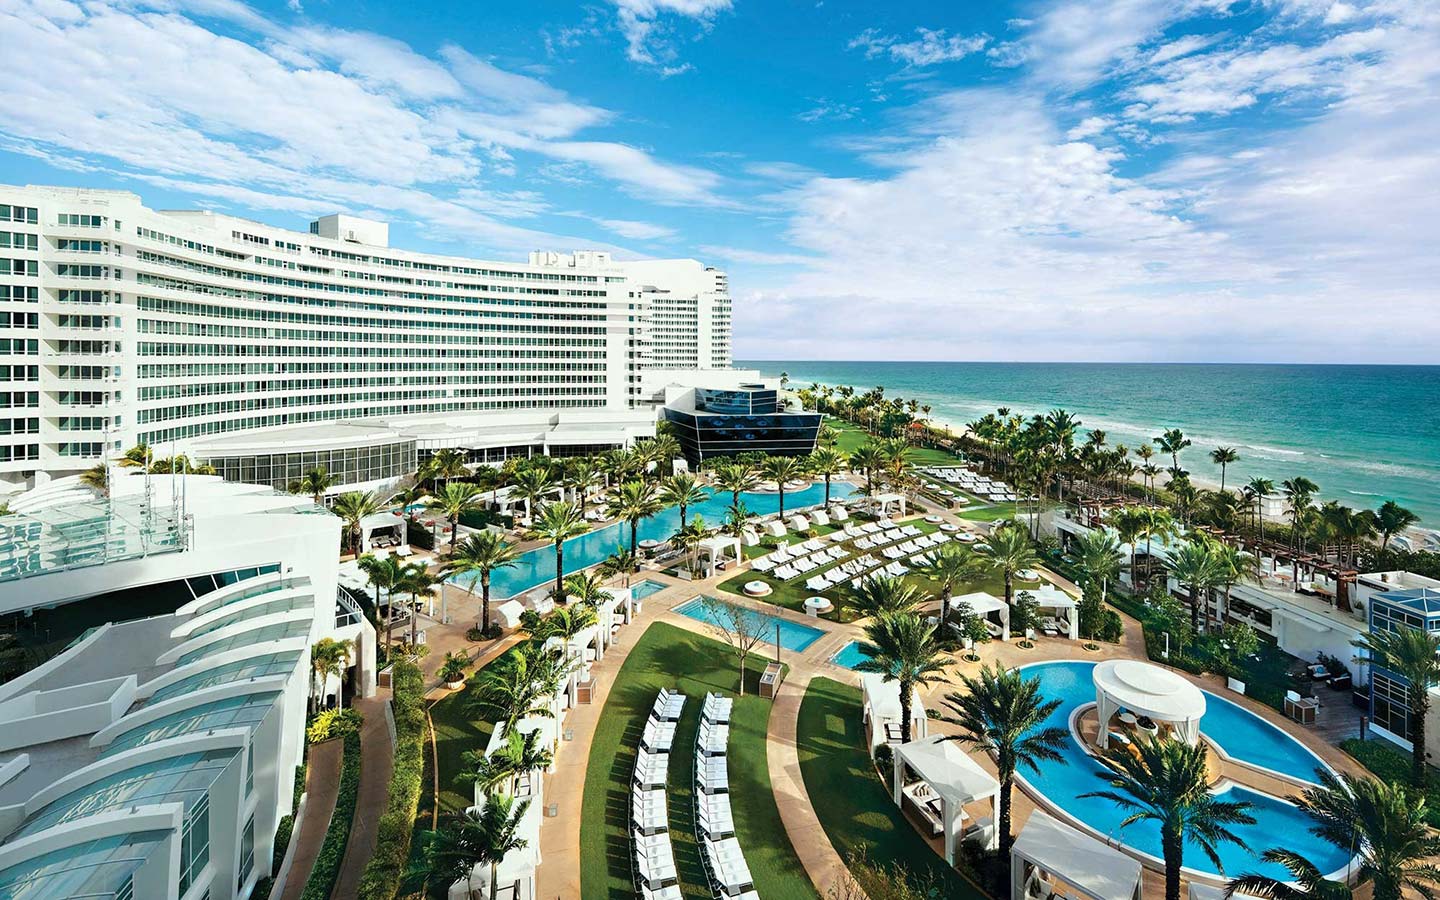 Aerial view of the Fontainebleau Miami Beach